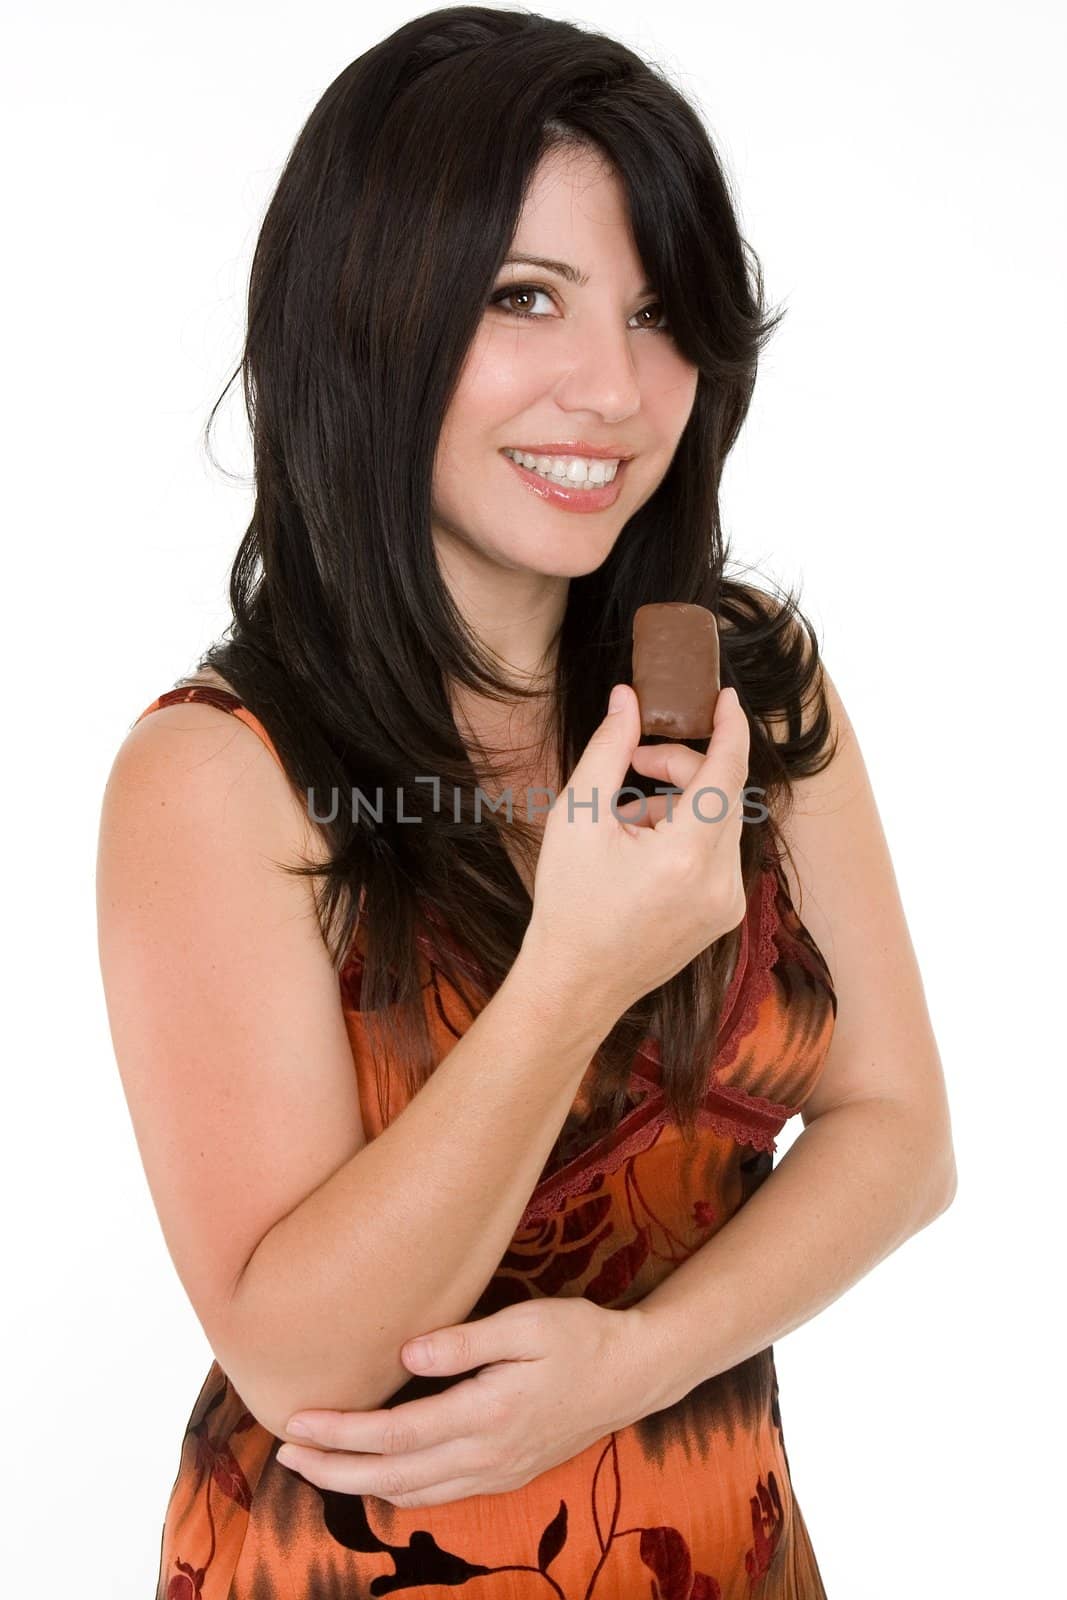 Woman in summer dress enjoying a chocolate snack in moderation.